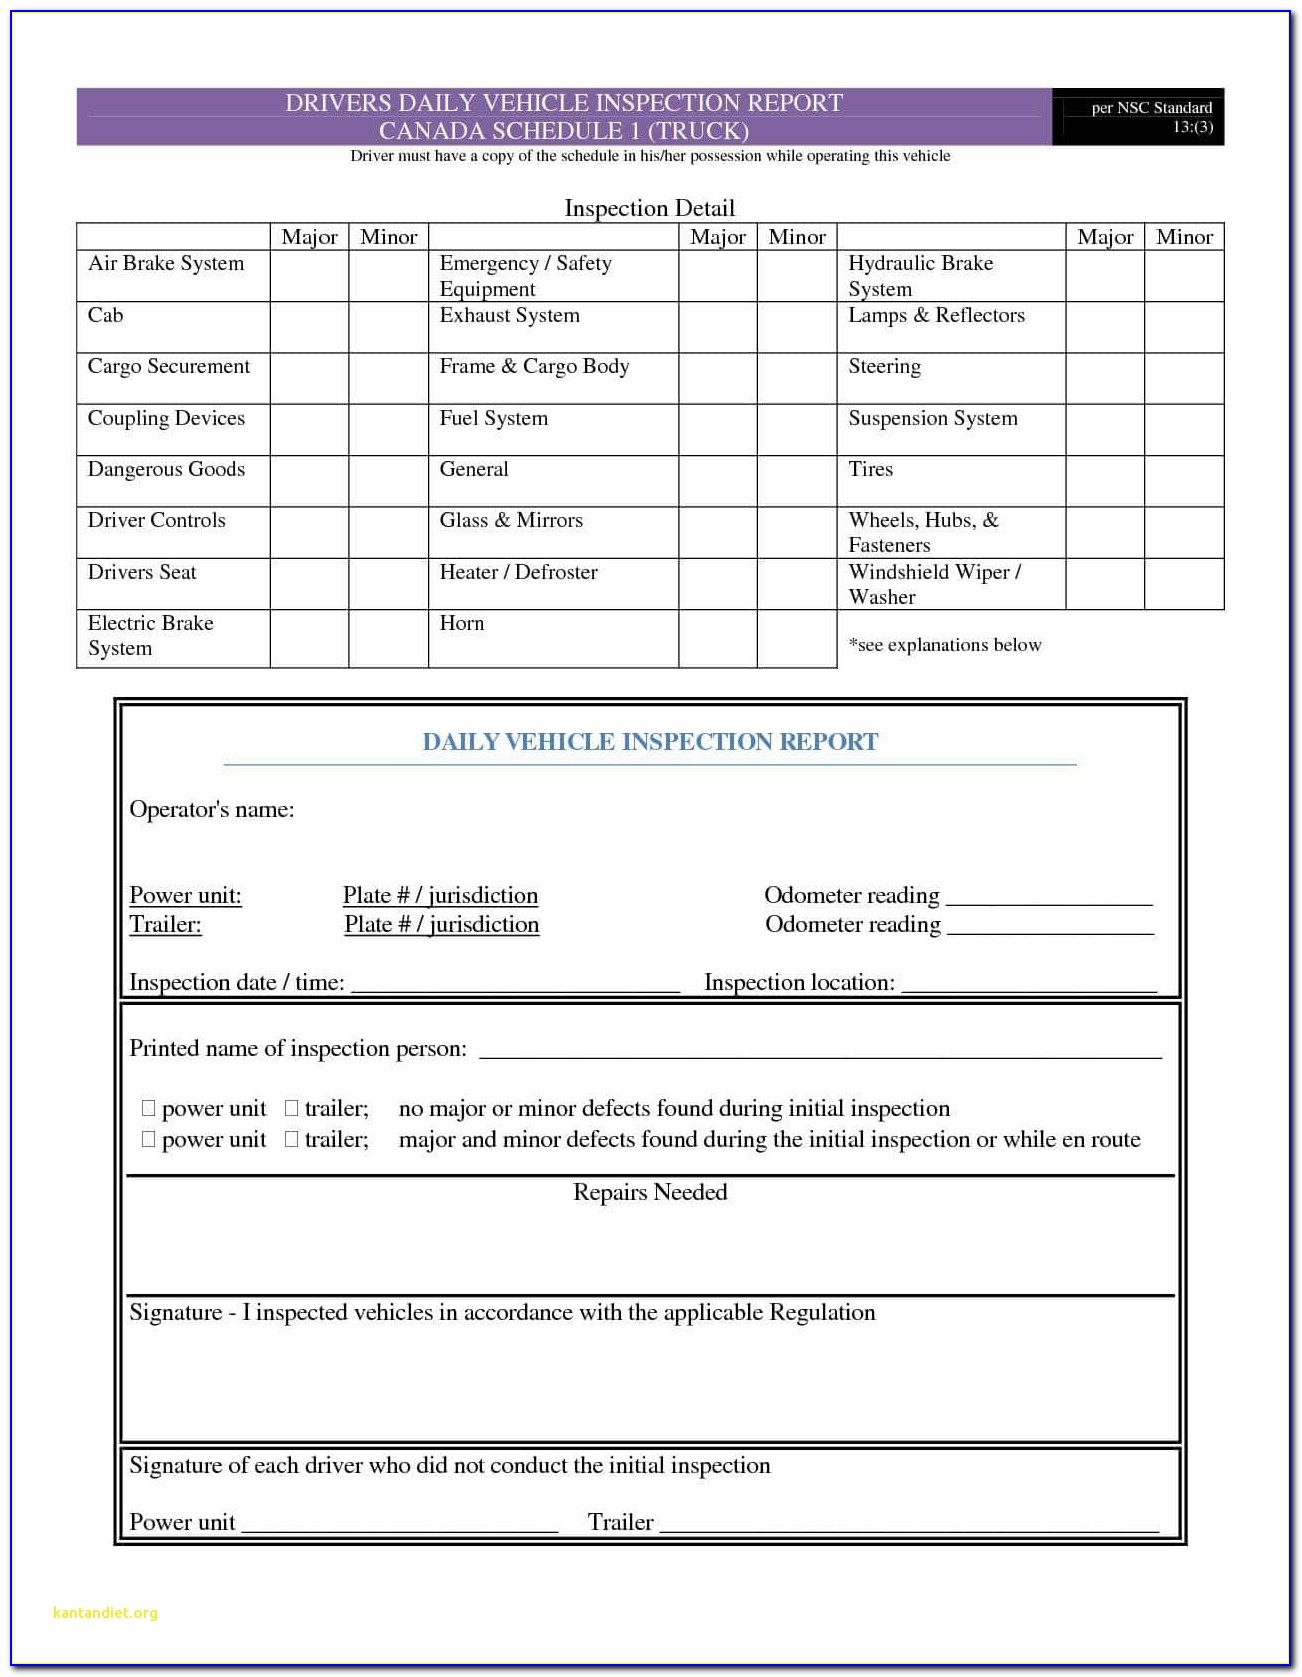 Daily Inspection Report Template New Drivers Daily Vehicle Inspection Report Form And Daily Vehicle